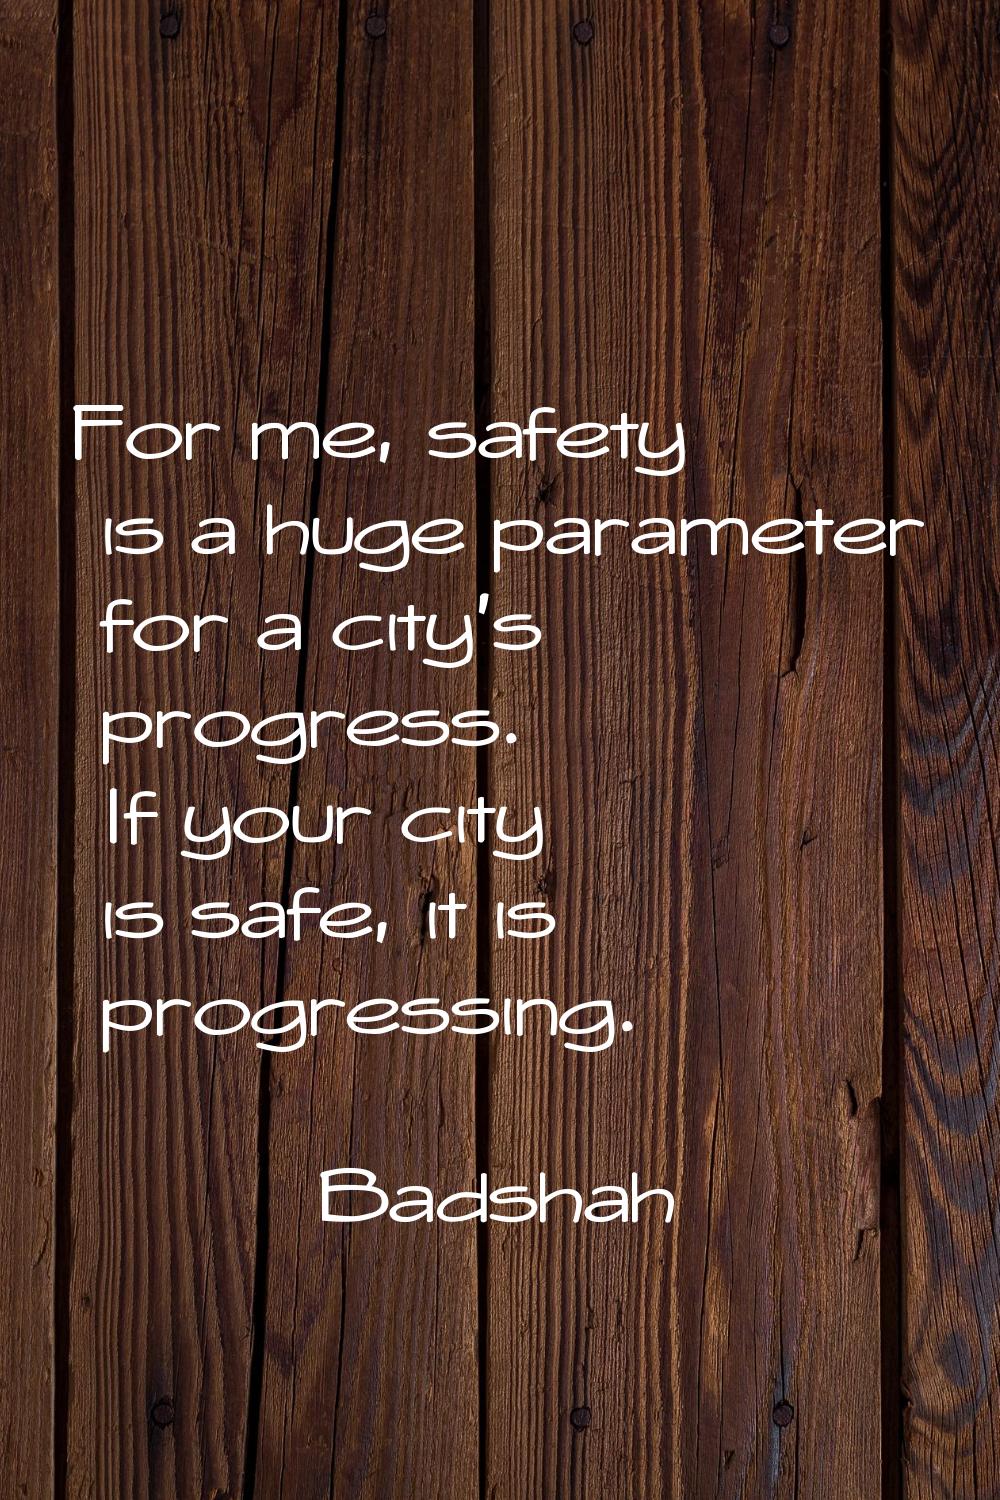 For me, safety is a huge parameter for a city's progress. If your city is safe, it is progressing.